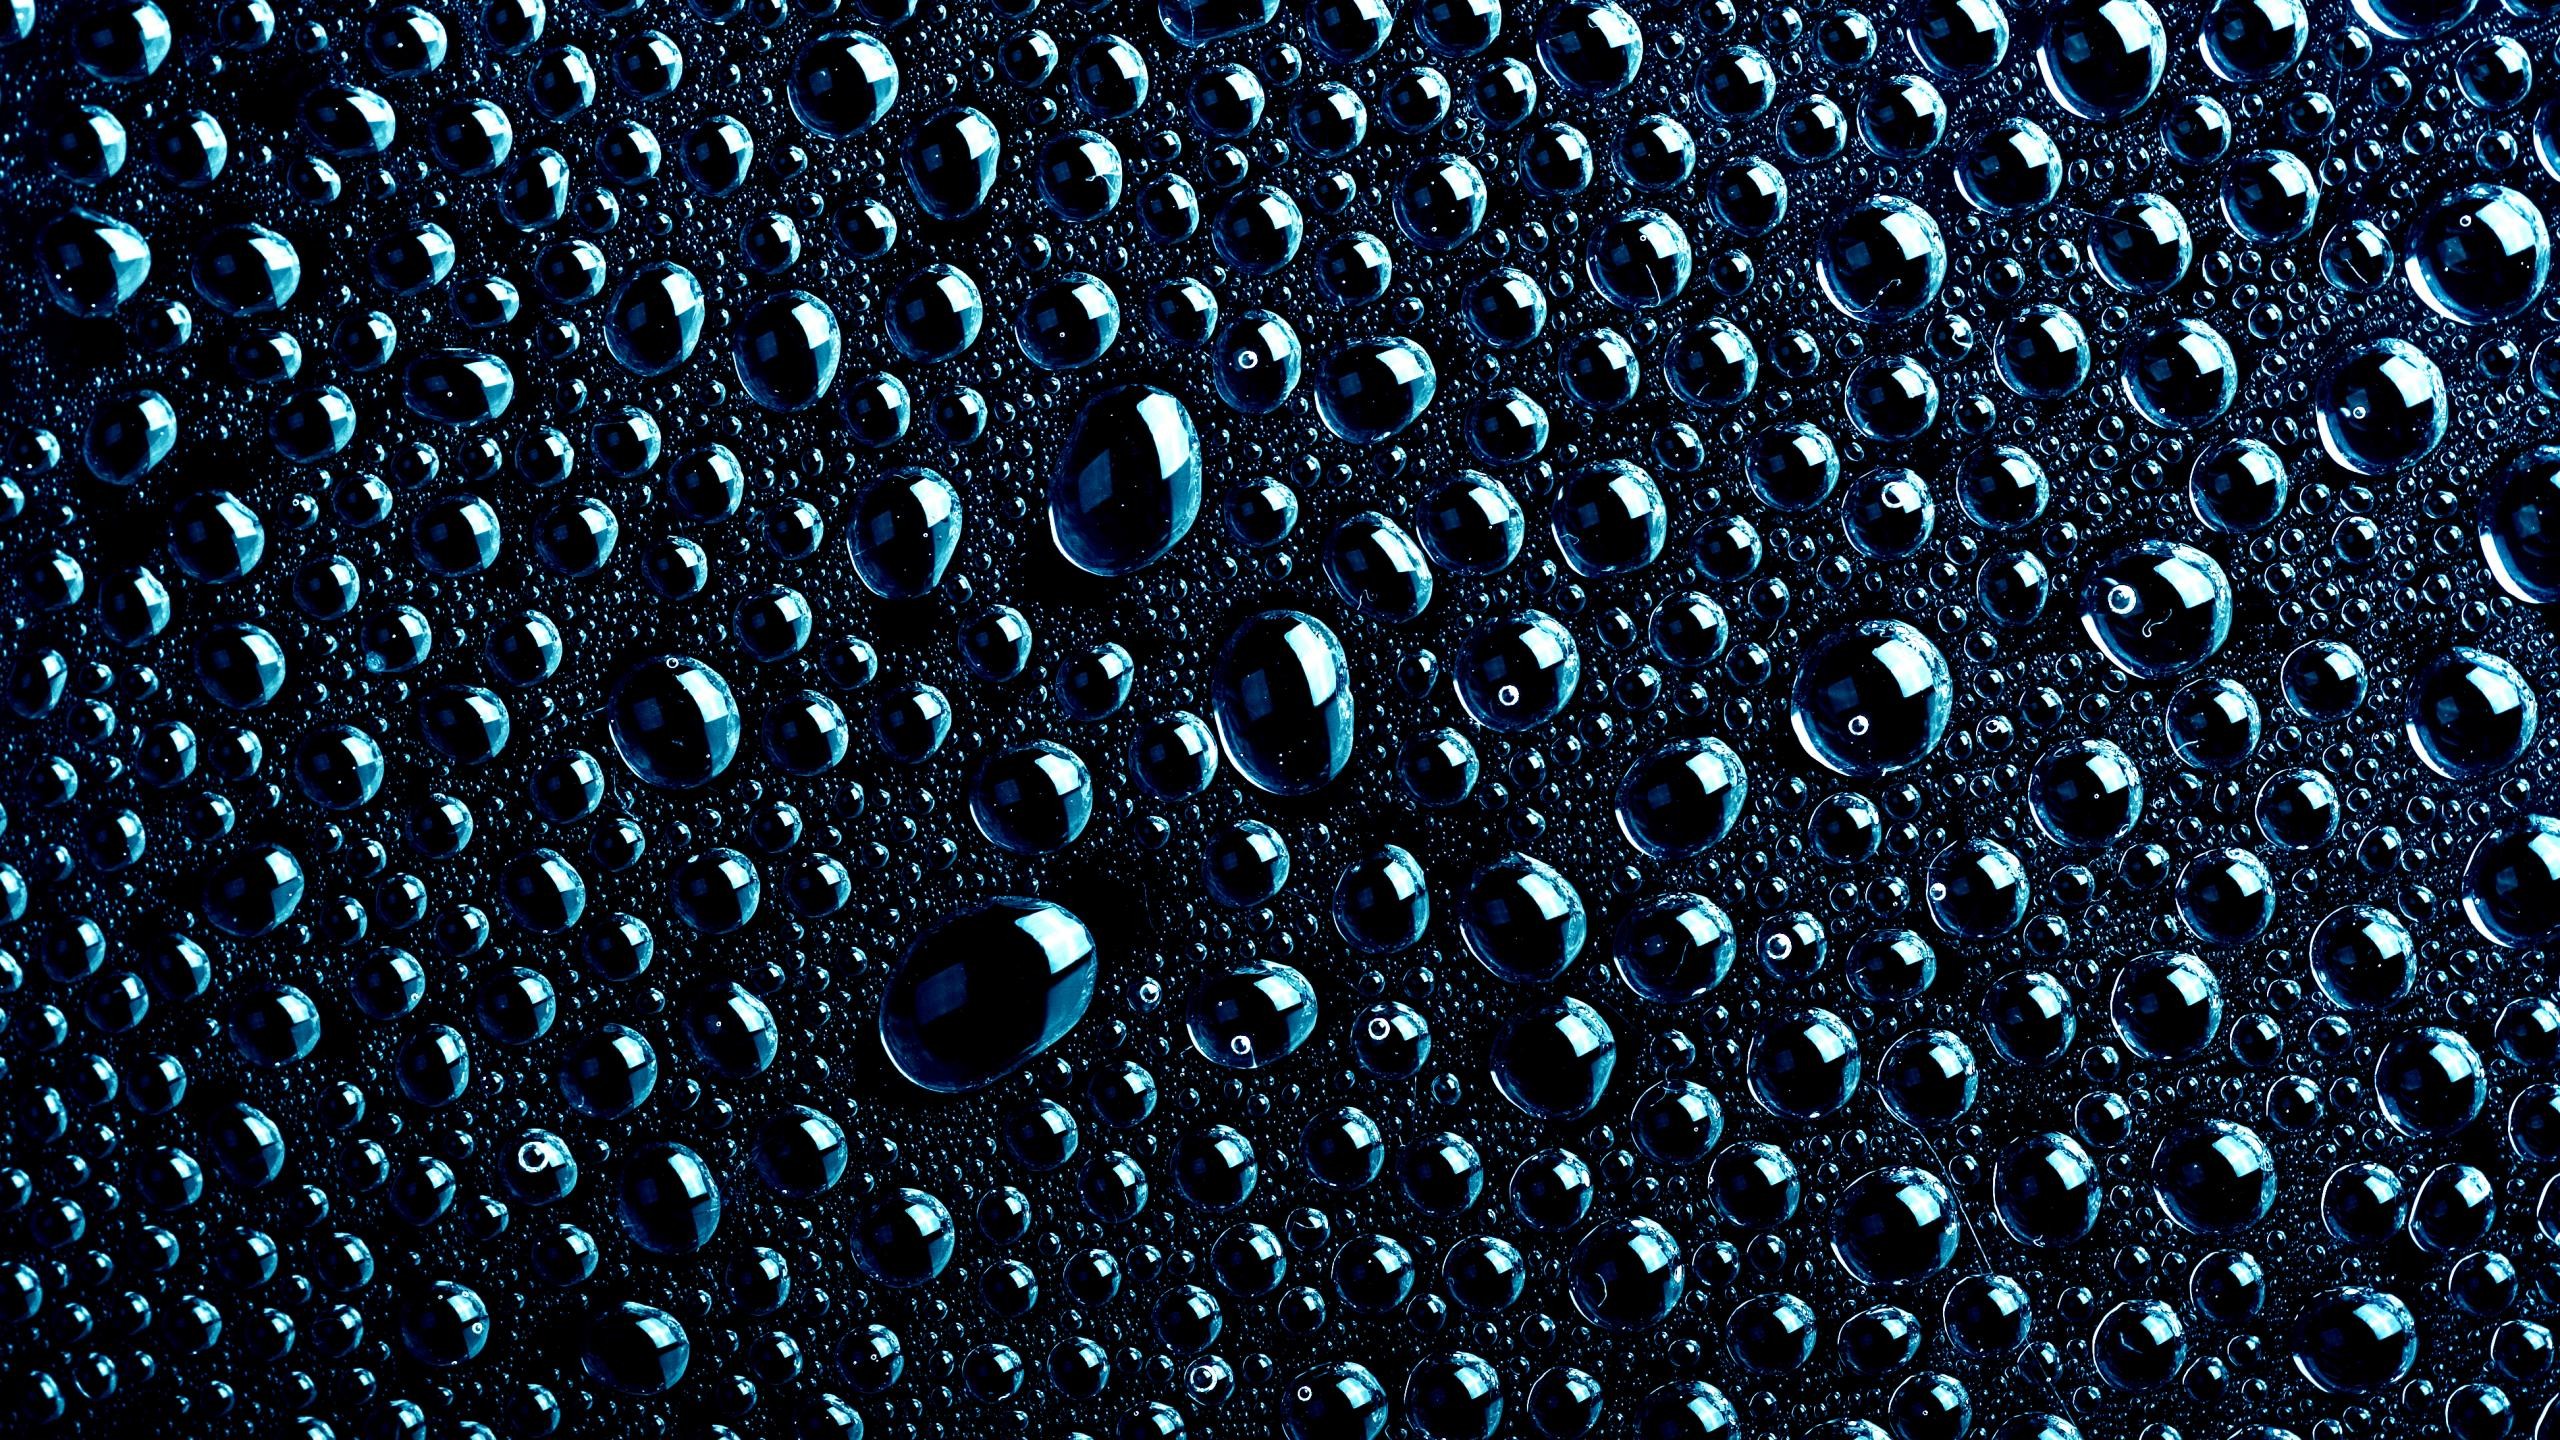 General 2560x1440 abstract water drops texture